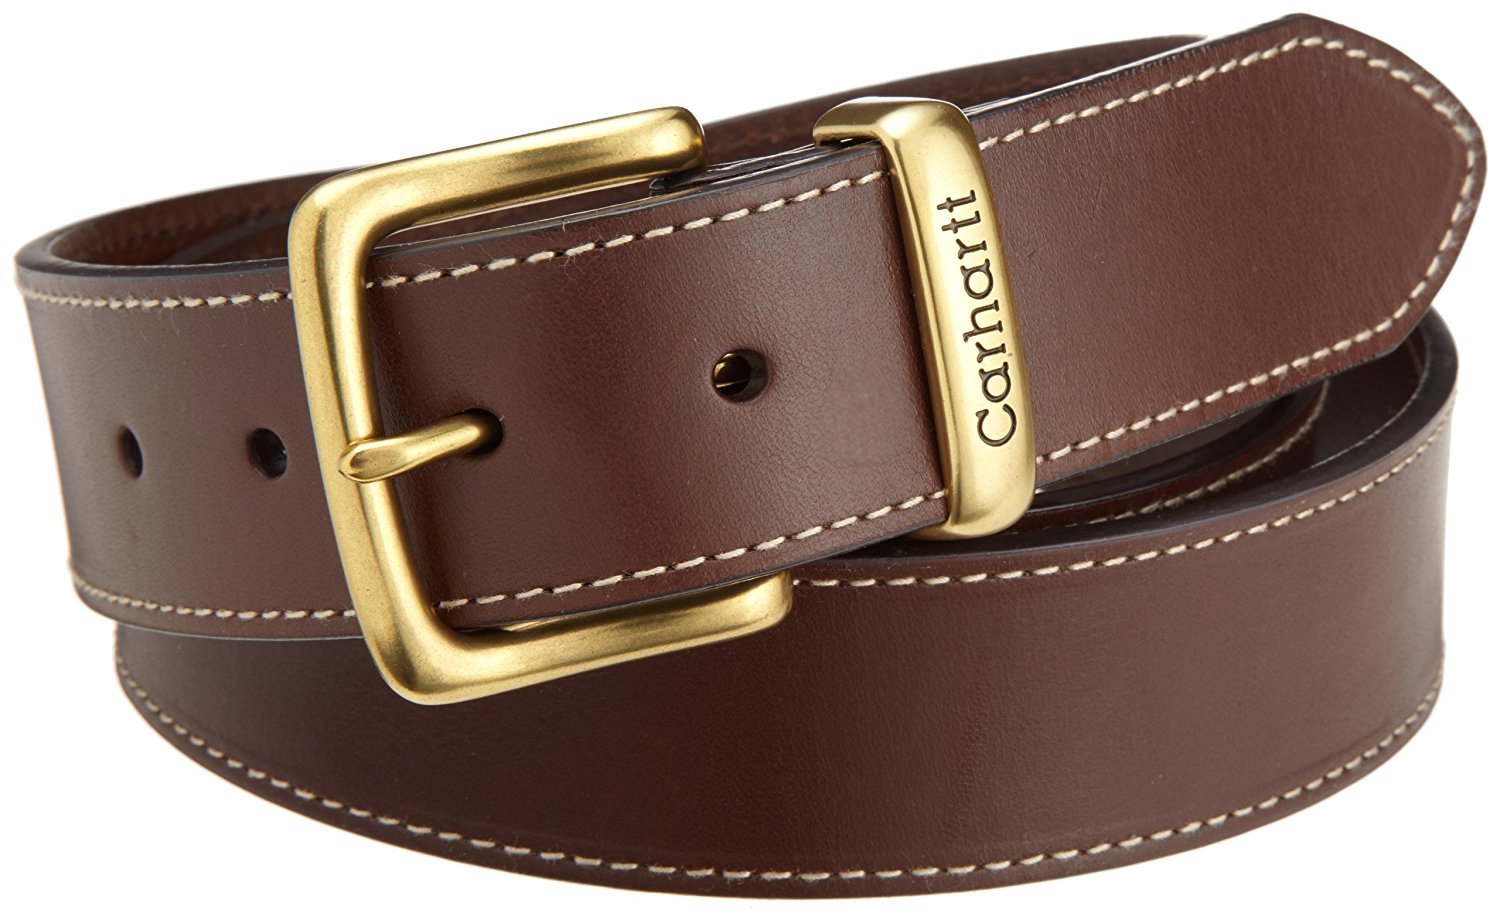 Belts For Men Online Shopping in Pakistan – Web ITB Group | News Articles And Guest Blogging